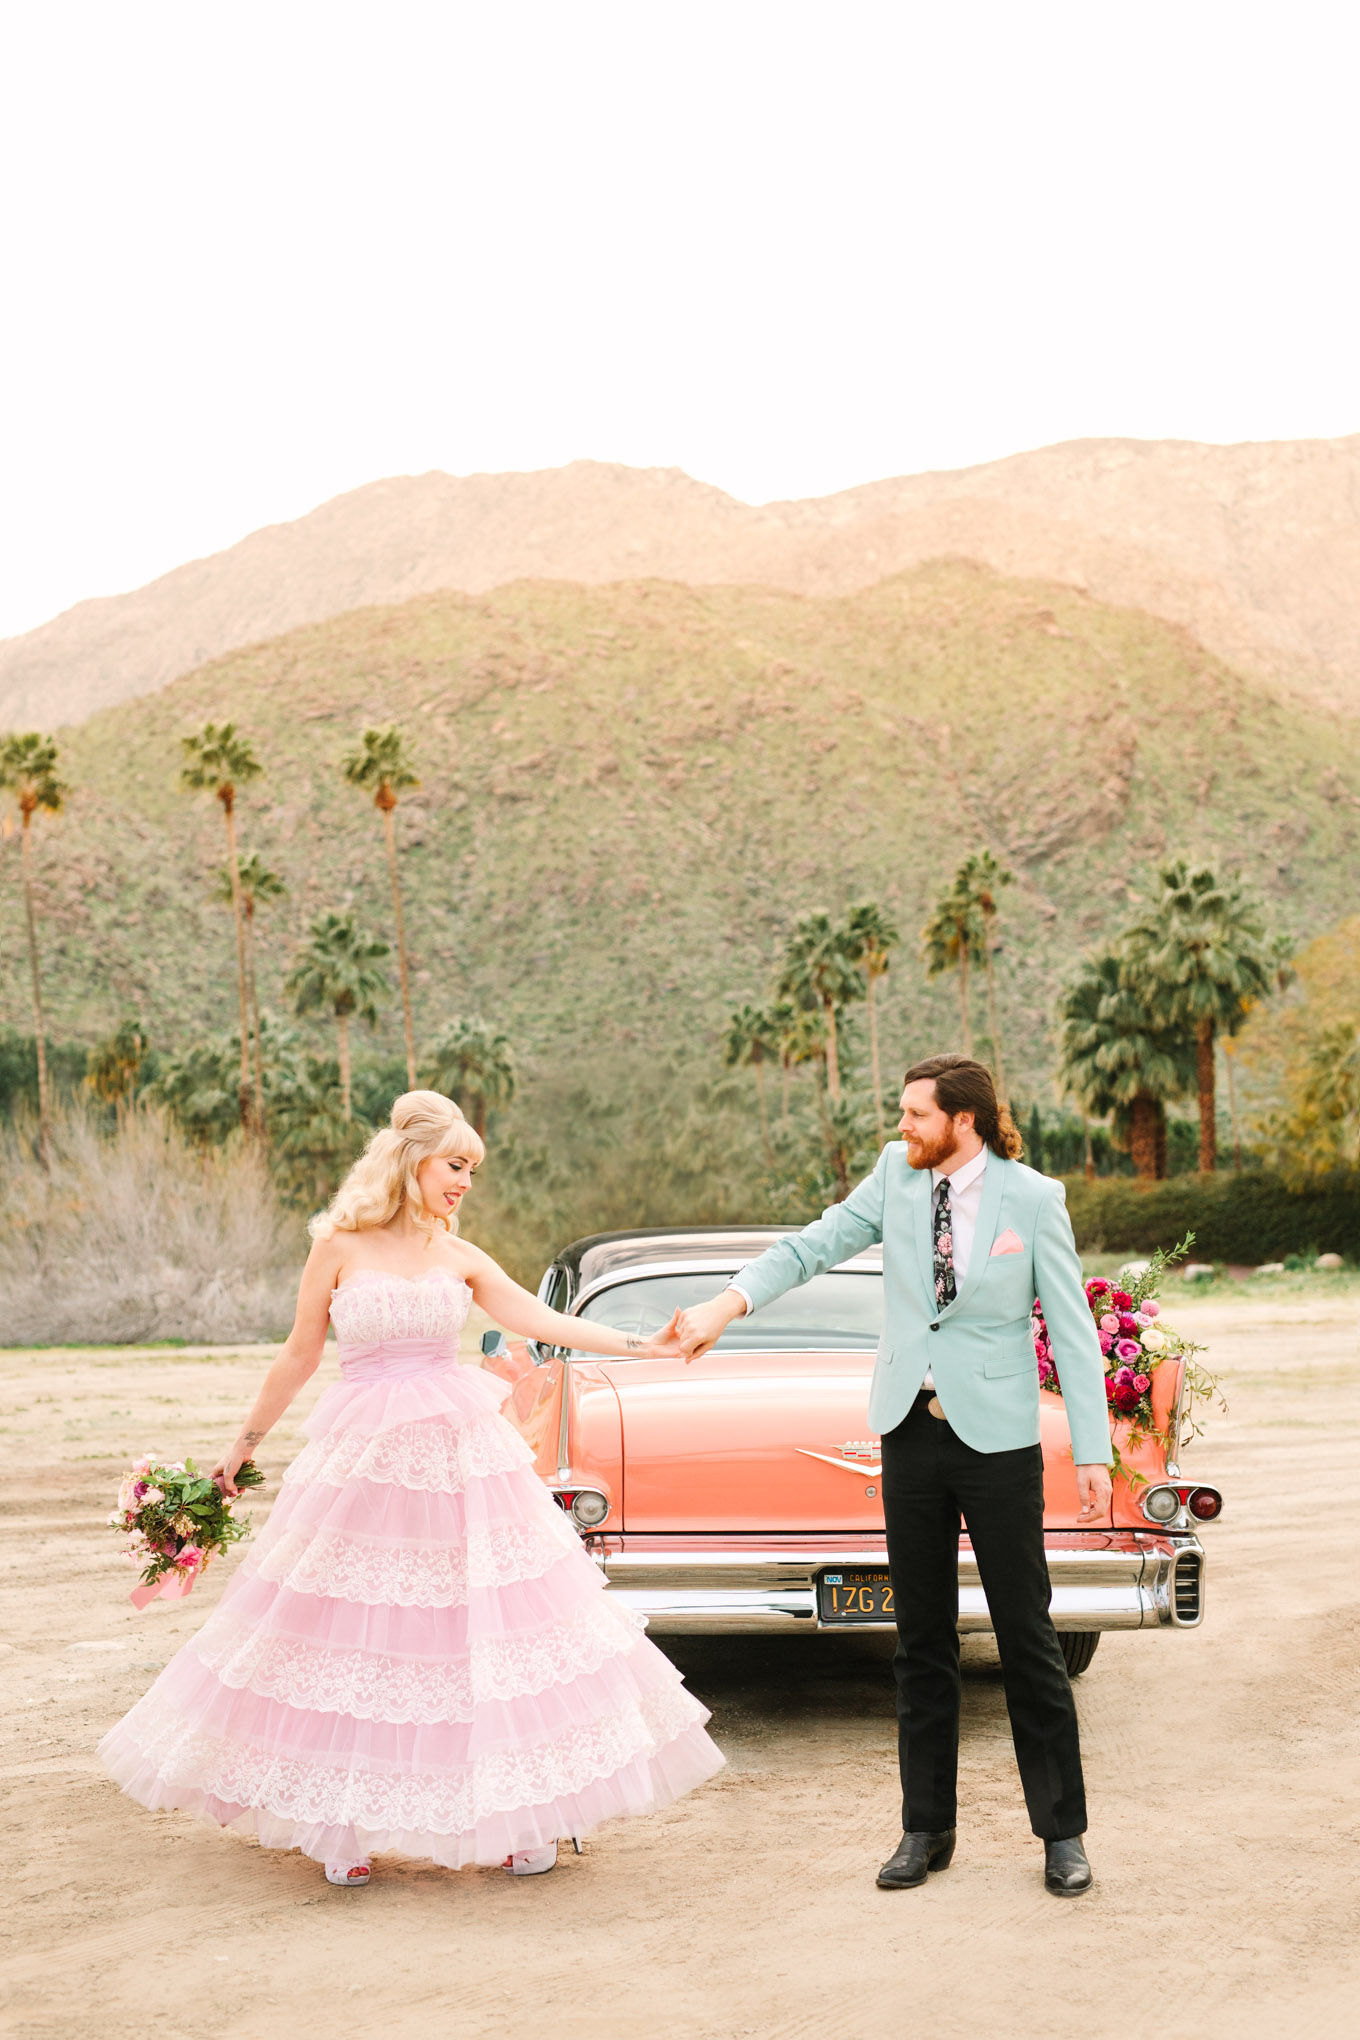 Bride and groom twirling with classic car. Modern vintage-inspired Palm Springs engagement session with a 1960s pink Cadillac, retro clothing, and flowers by Shindig Chic. | Colorful and elevated wedding inspiration for fun-loving couples in Southern California | #engagementsession #PalmSpringsengagement #vintageweddingdress #floralcar #pinkcar   Source: Mary Costa Photography | Los Angeles